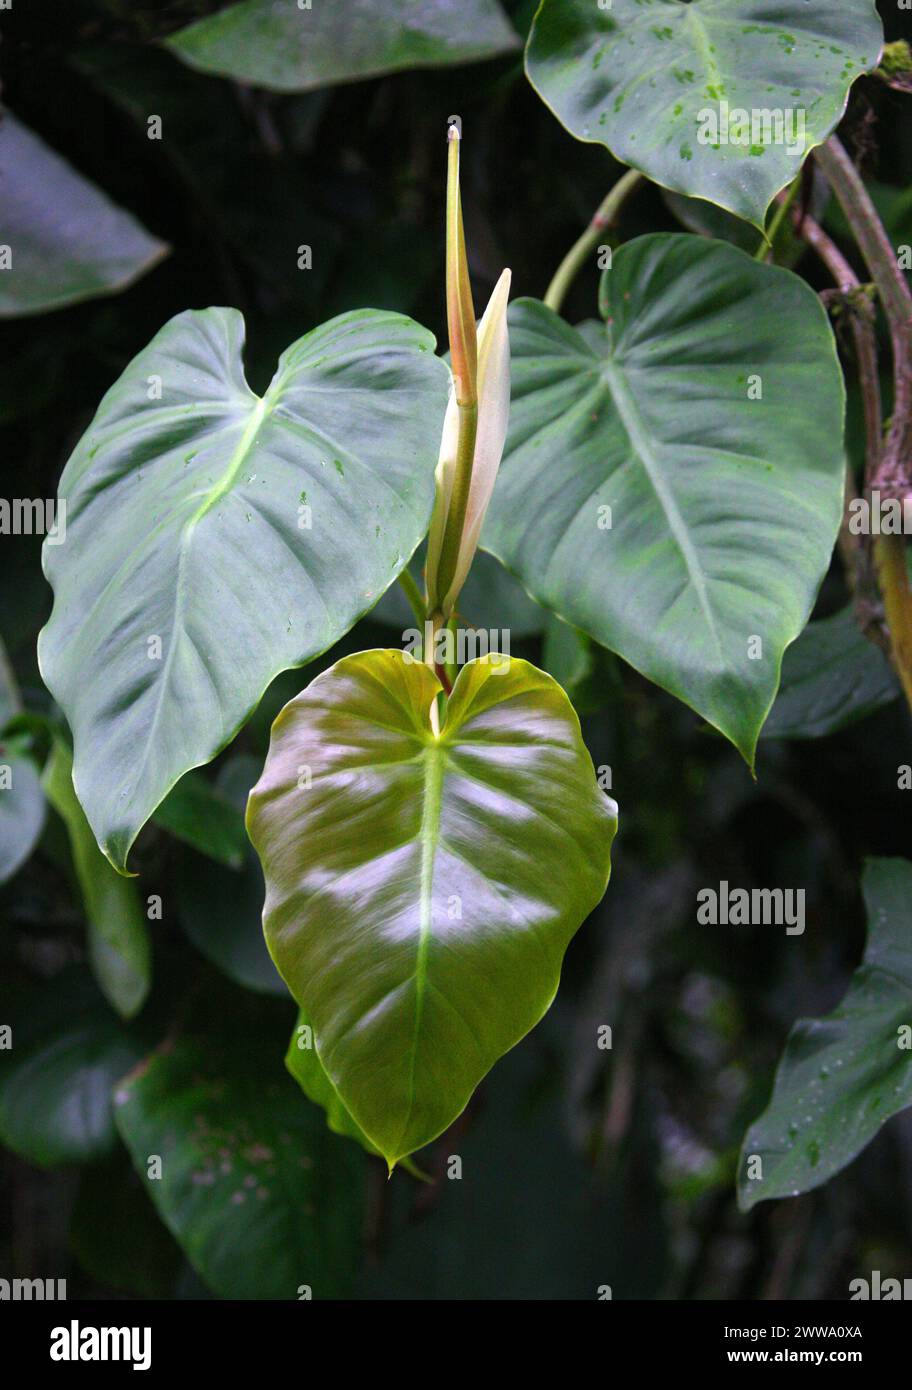 Heartleaf Philodendron, Philodendron hederaceum, Araceae. Costa Rica Rainforest, Central America. Syn. Philodendron scandens. Stock Photo